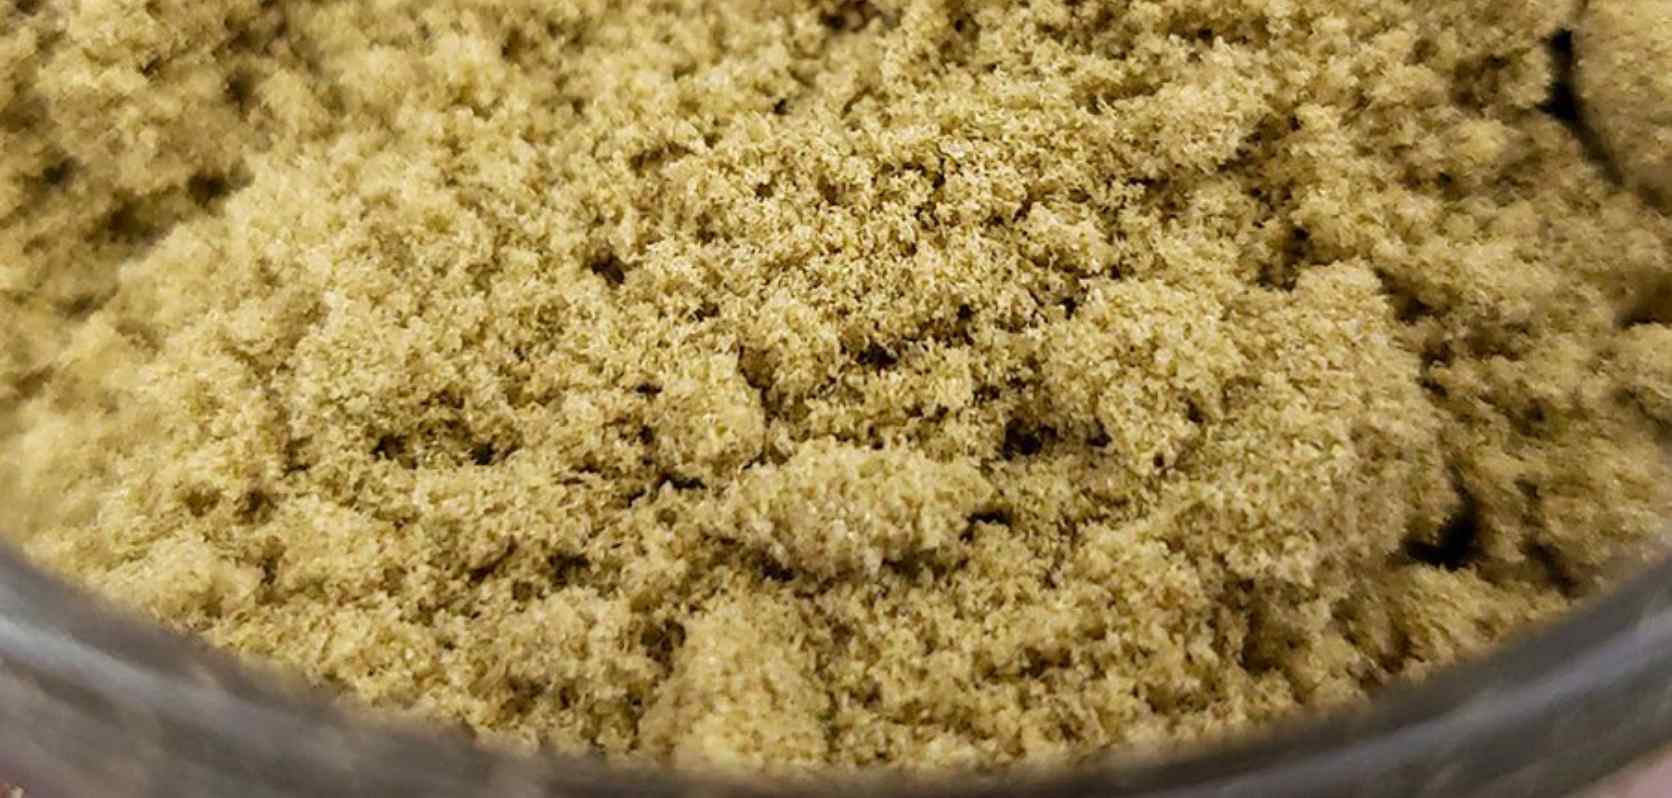 Now that you have your equipment assembled and know how to handle dry ice, it's time to make dry ice hash with fresh buds.